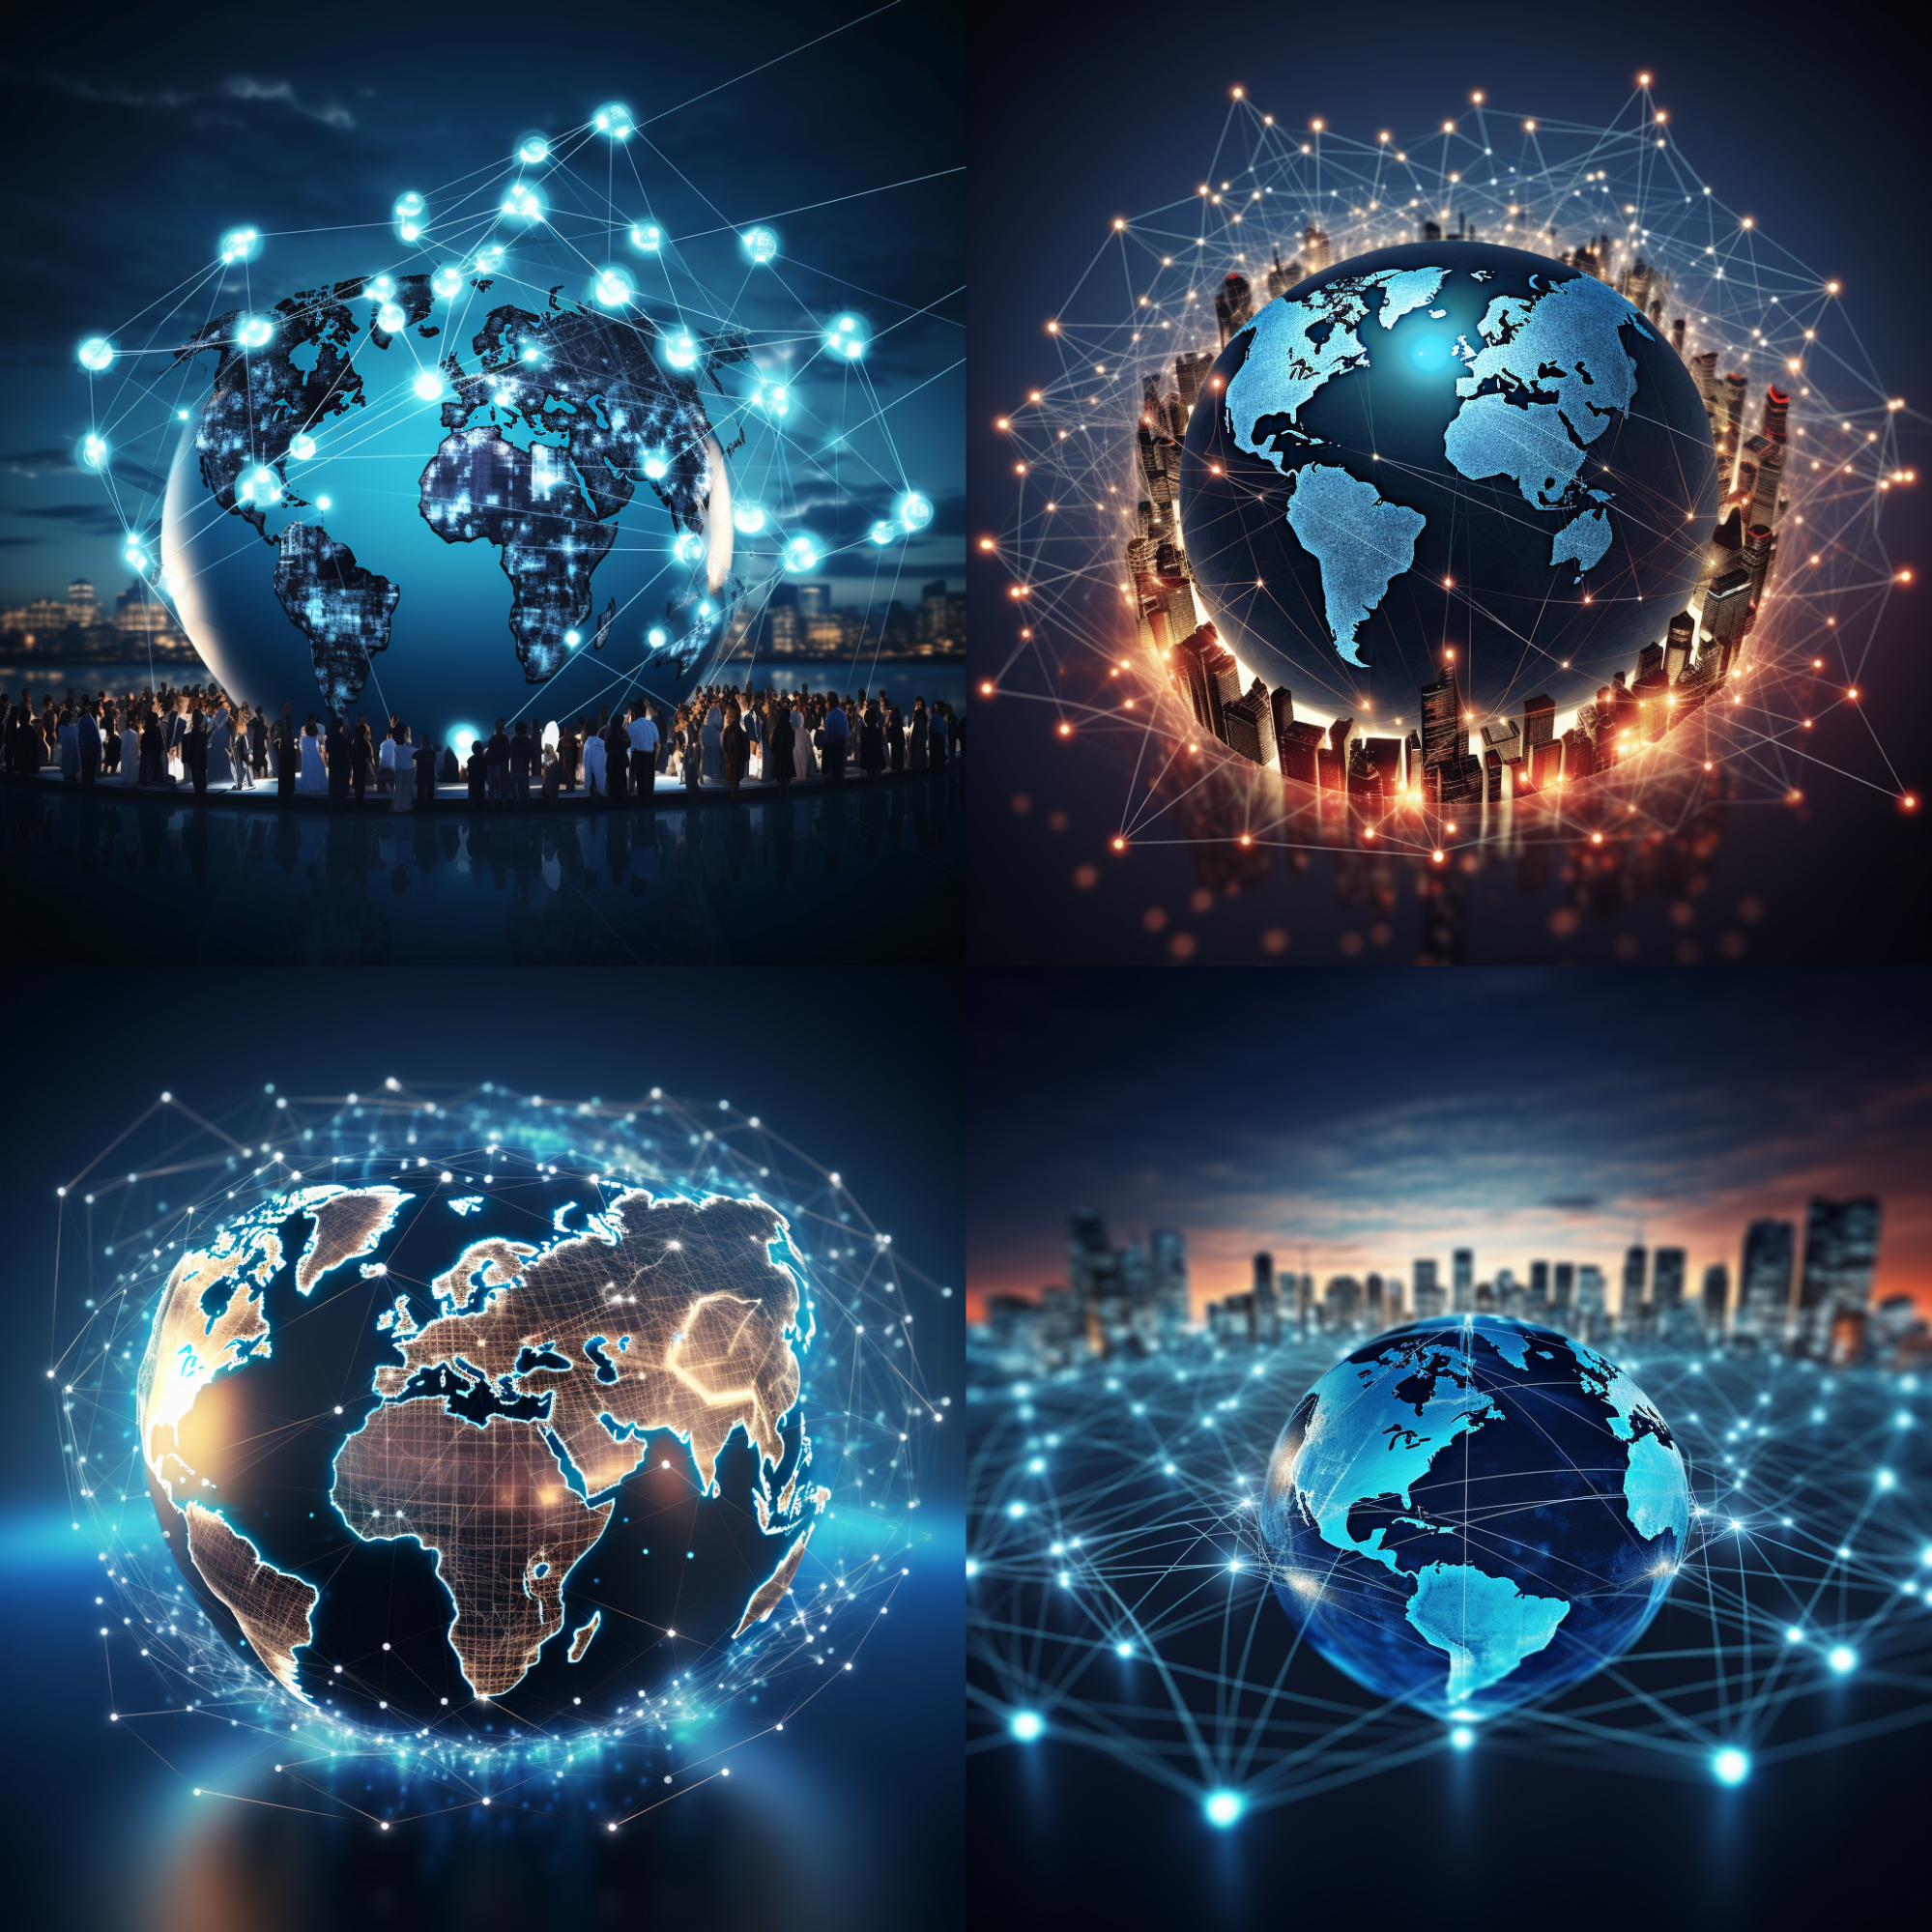 Four image options generated by Midjourney based on a global connection map prompt